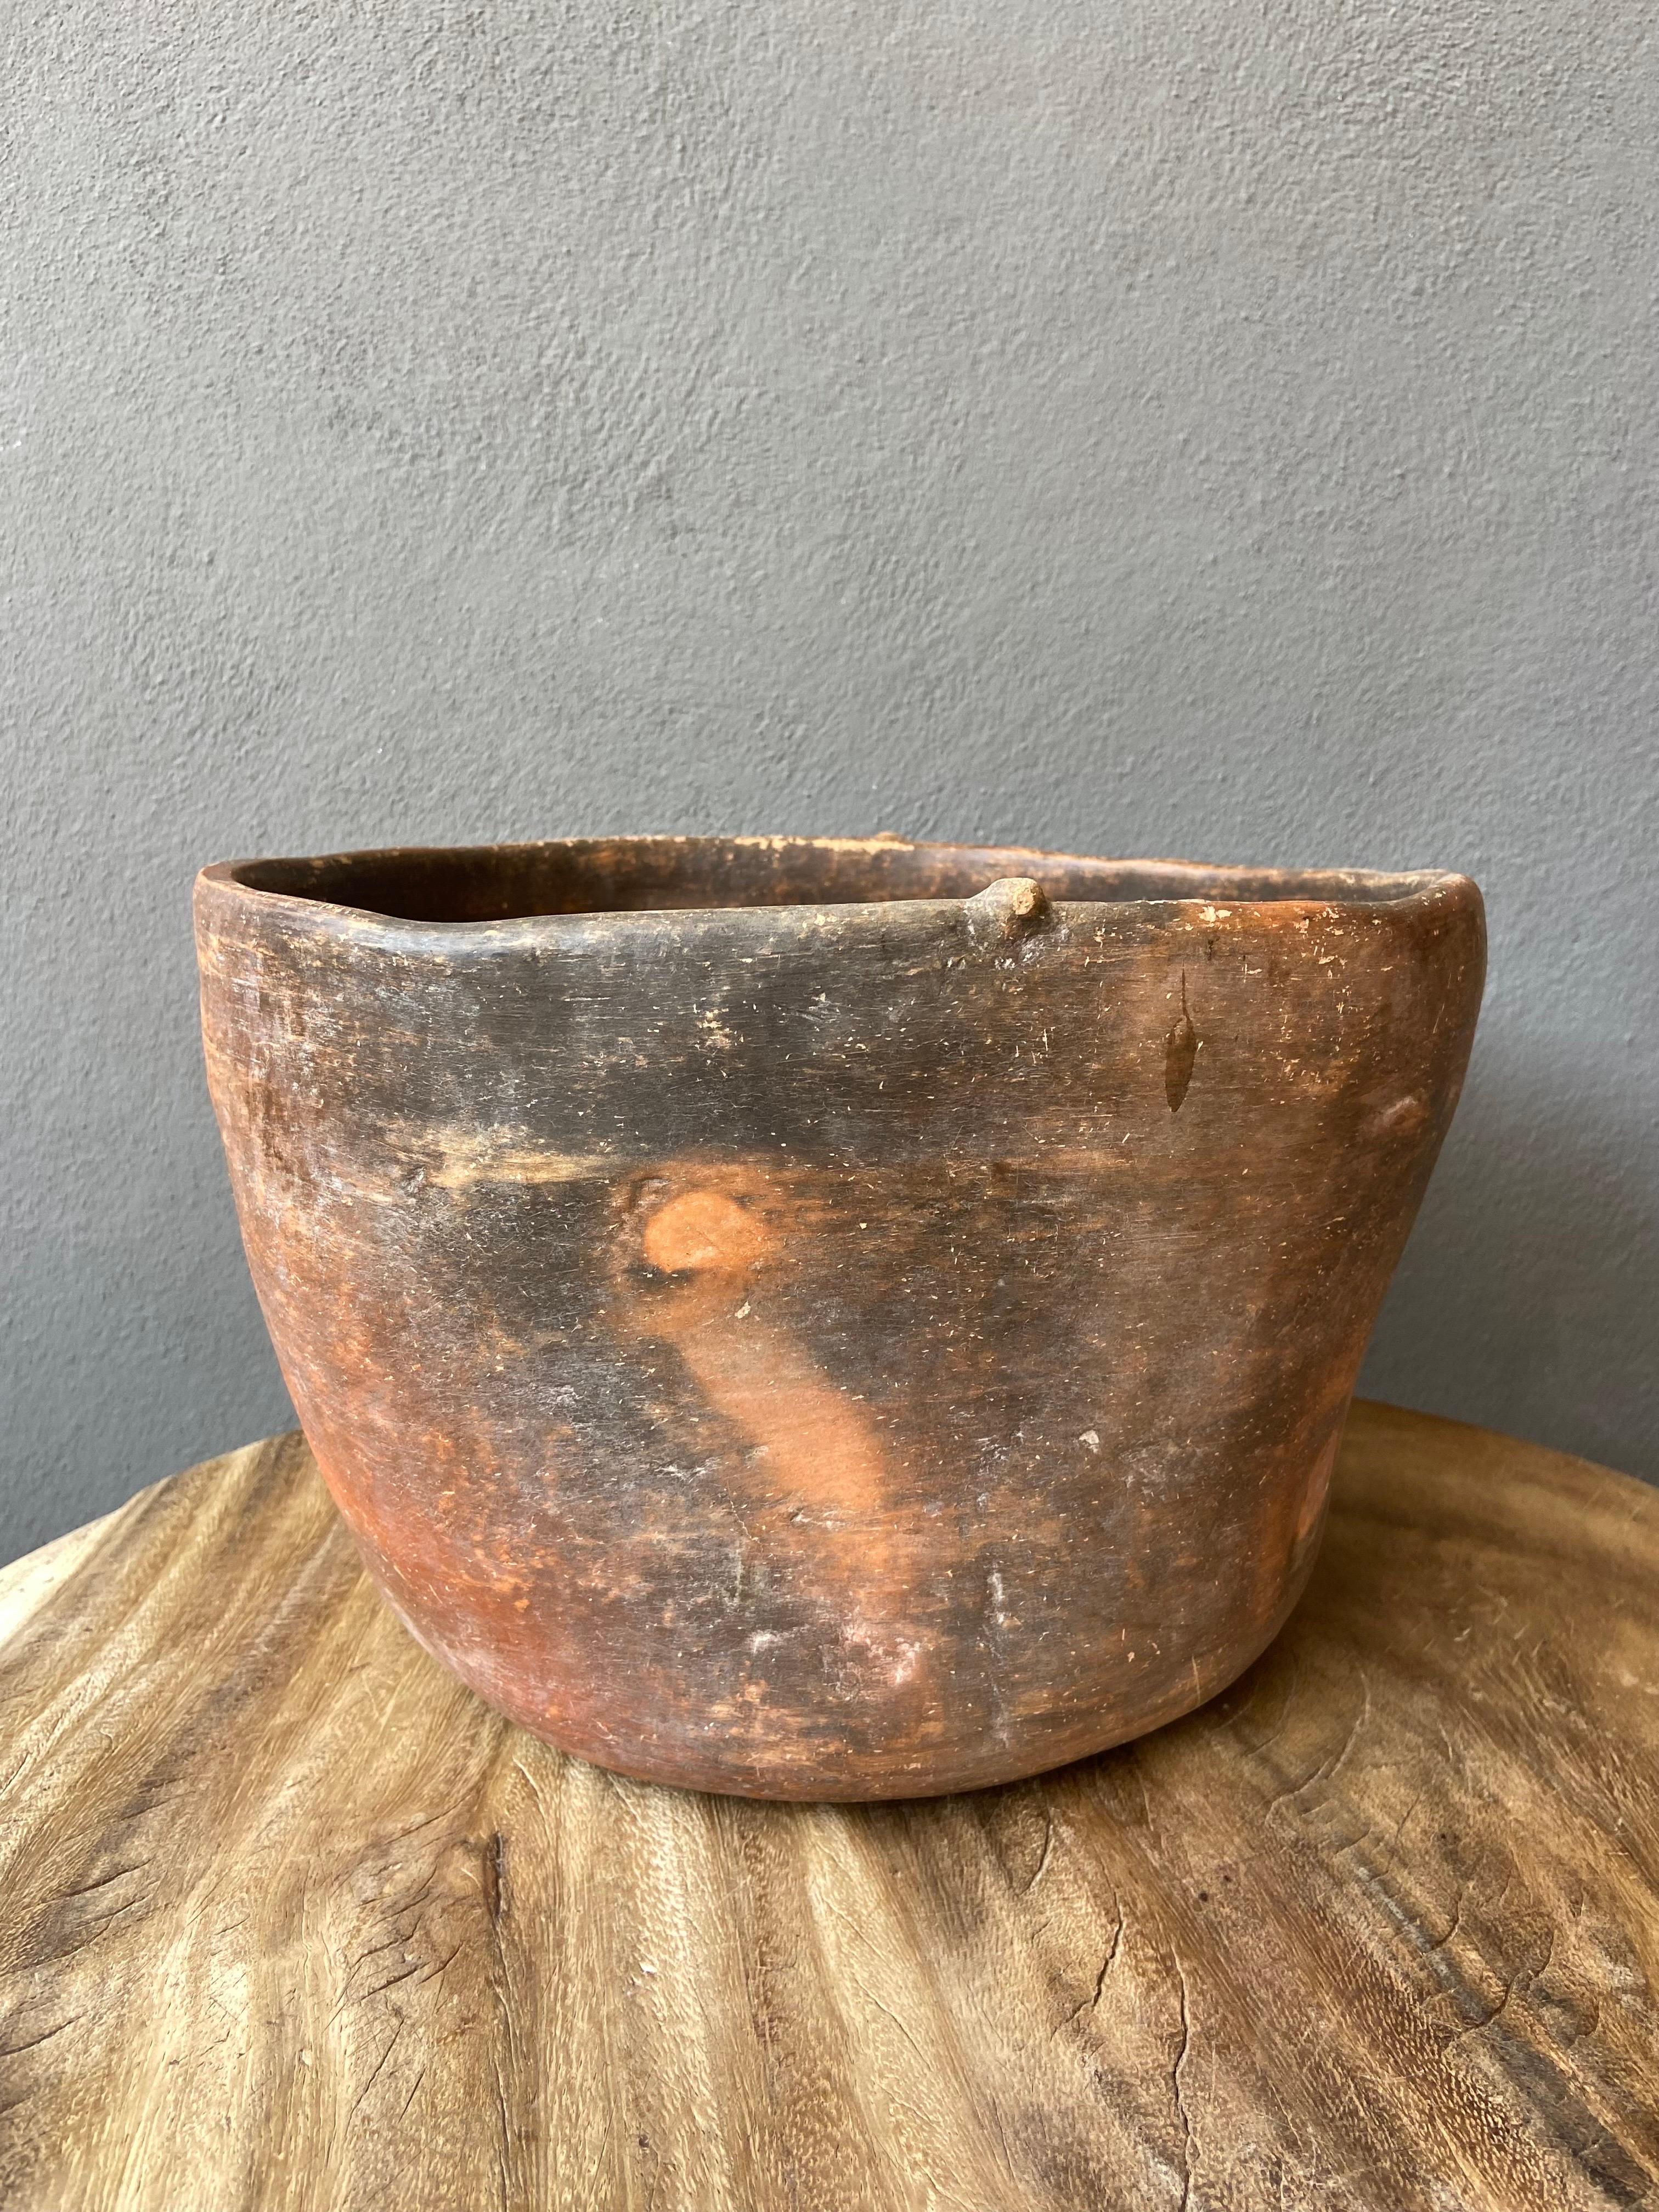 Fired Early 20th Century Ceramic Water Vessel from Mexico